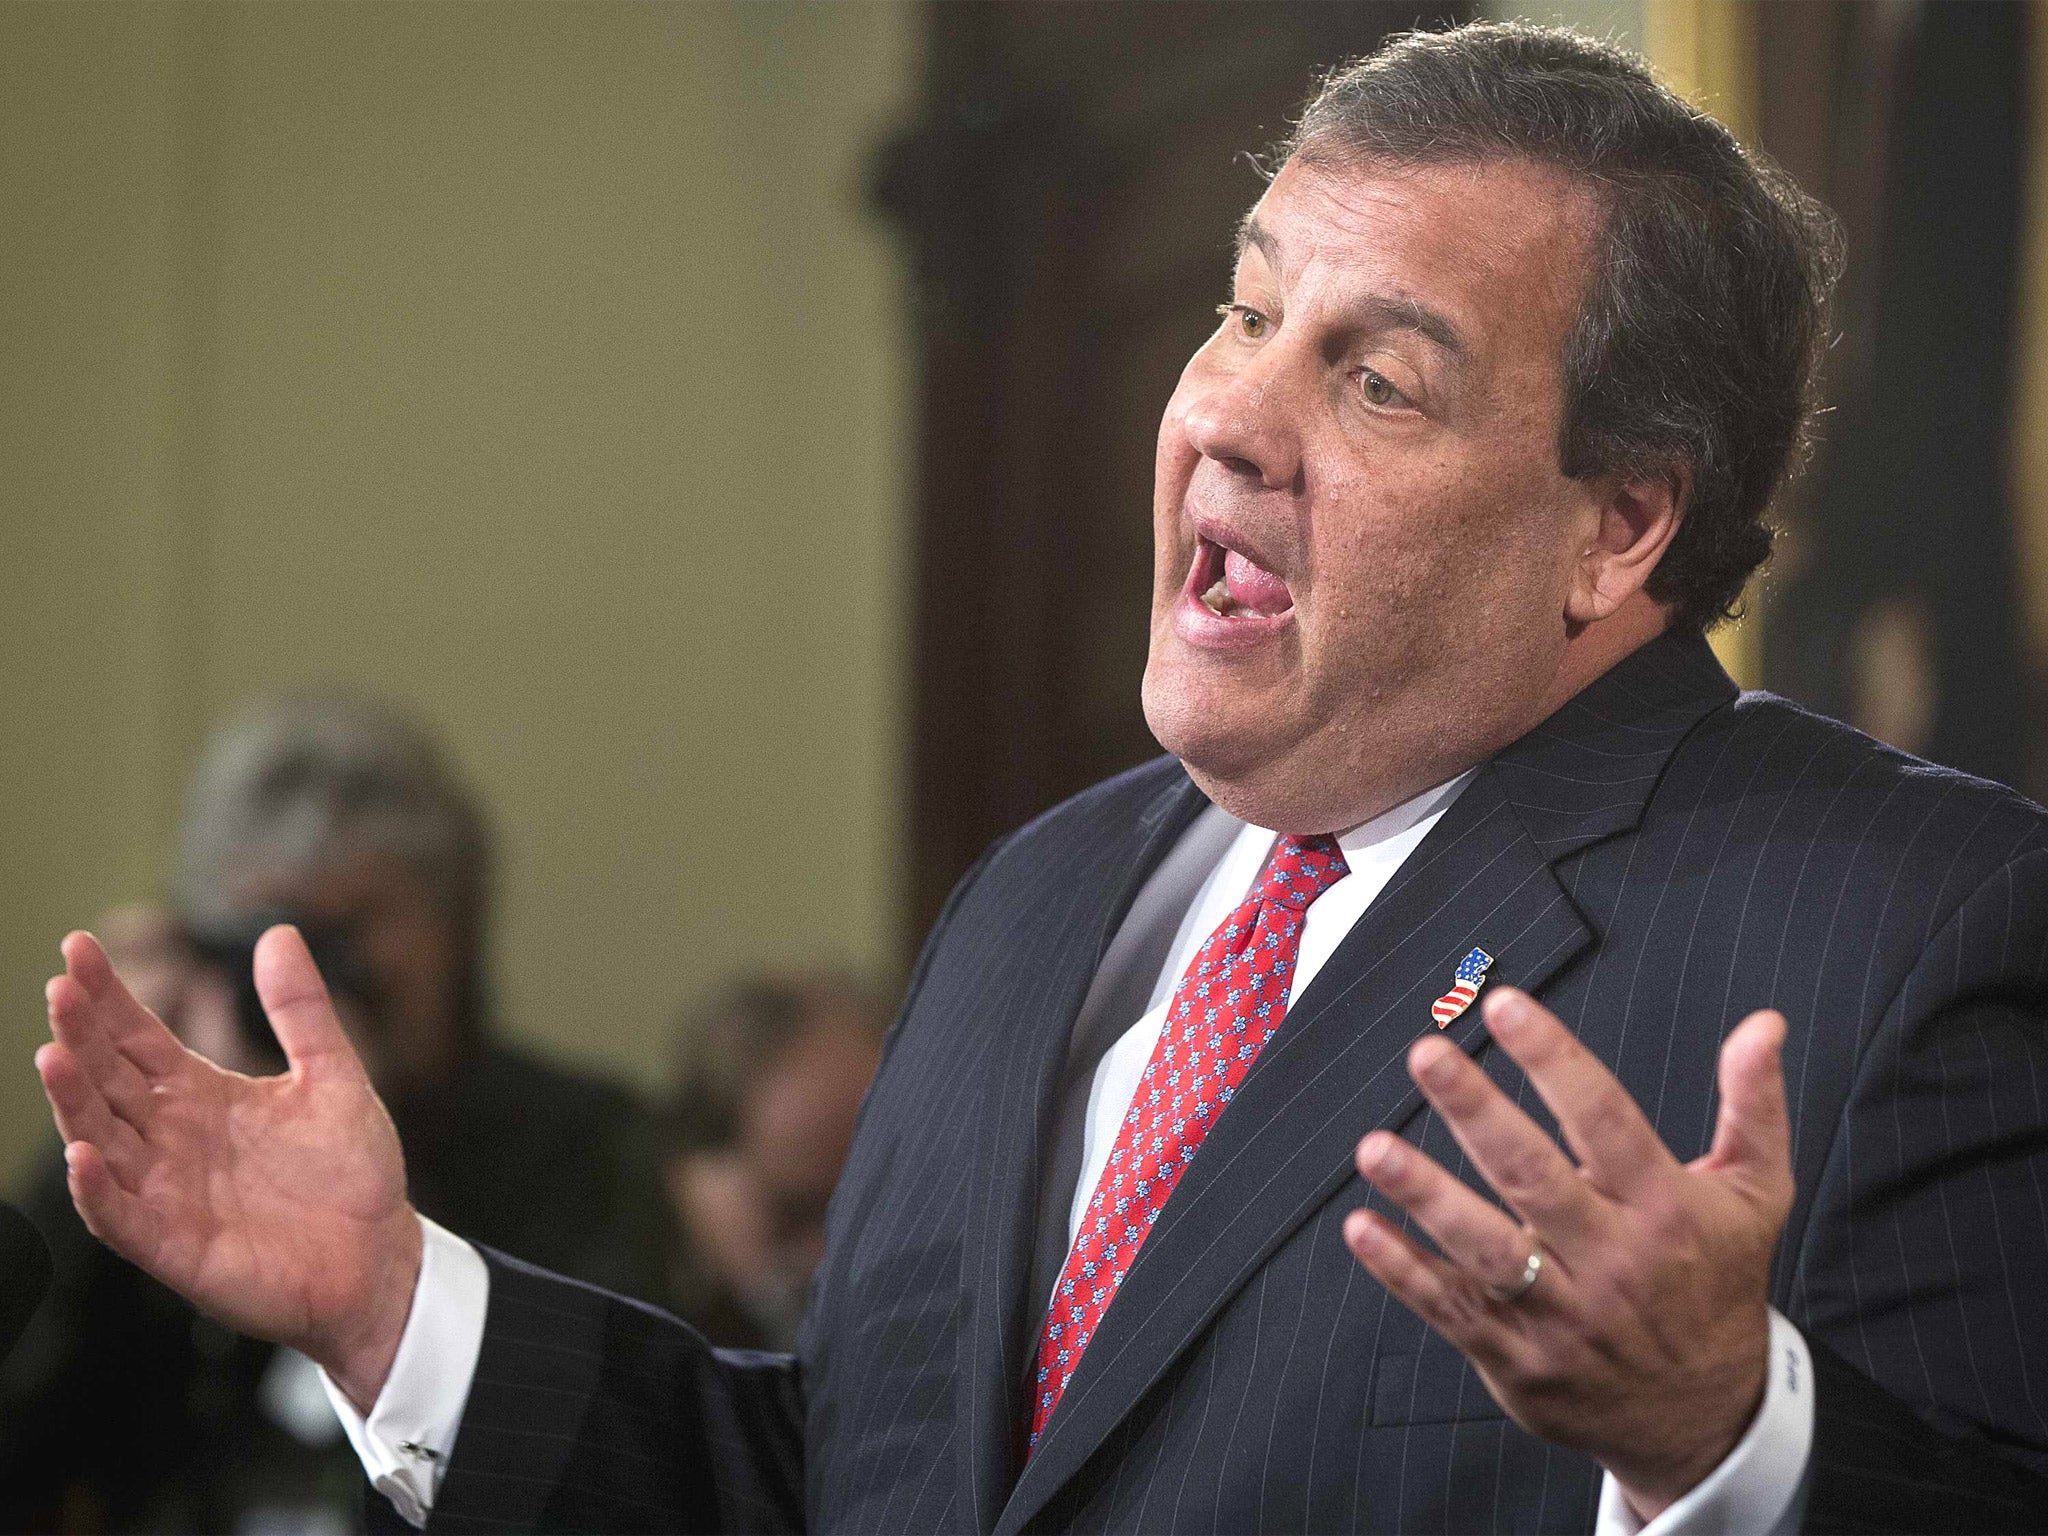 Governor Christie answering questions on 'Bridgegate' in 2013